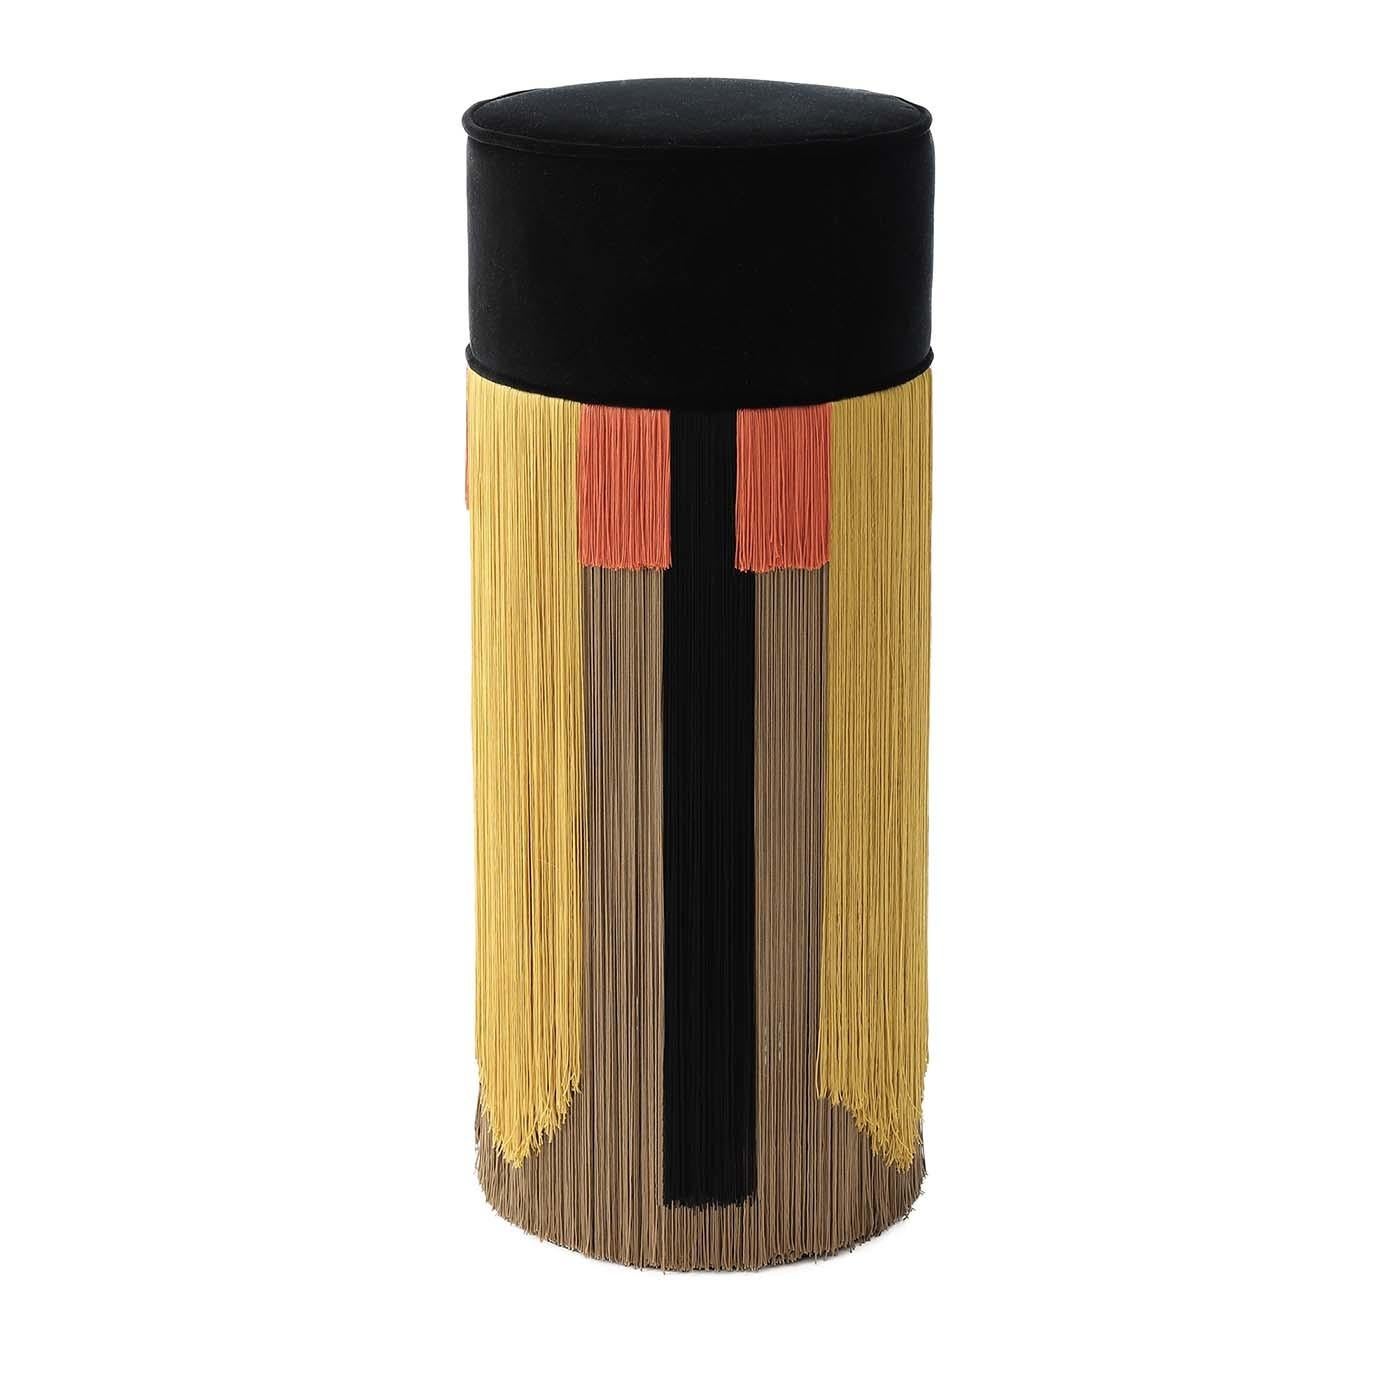 Playful and eclectic, this elegant bar stool will be eye-catching in a modern interior, positioned by an elevated counter as extra seating or in any room of the house to add a textural and colorful accent. Its structure in painted beechwood is